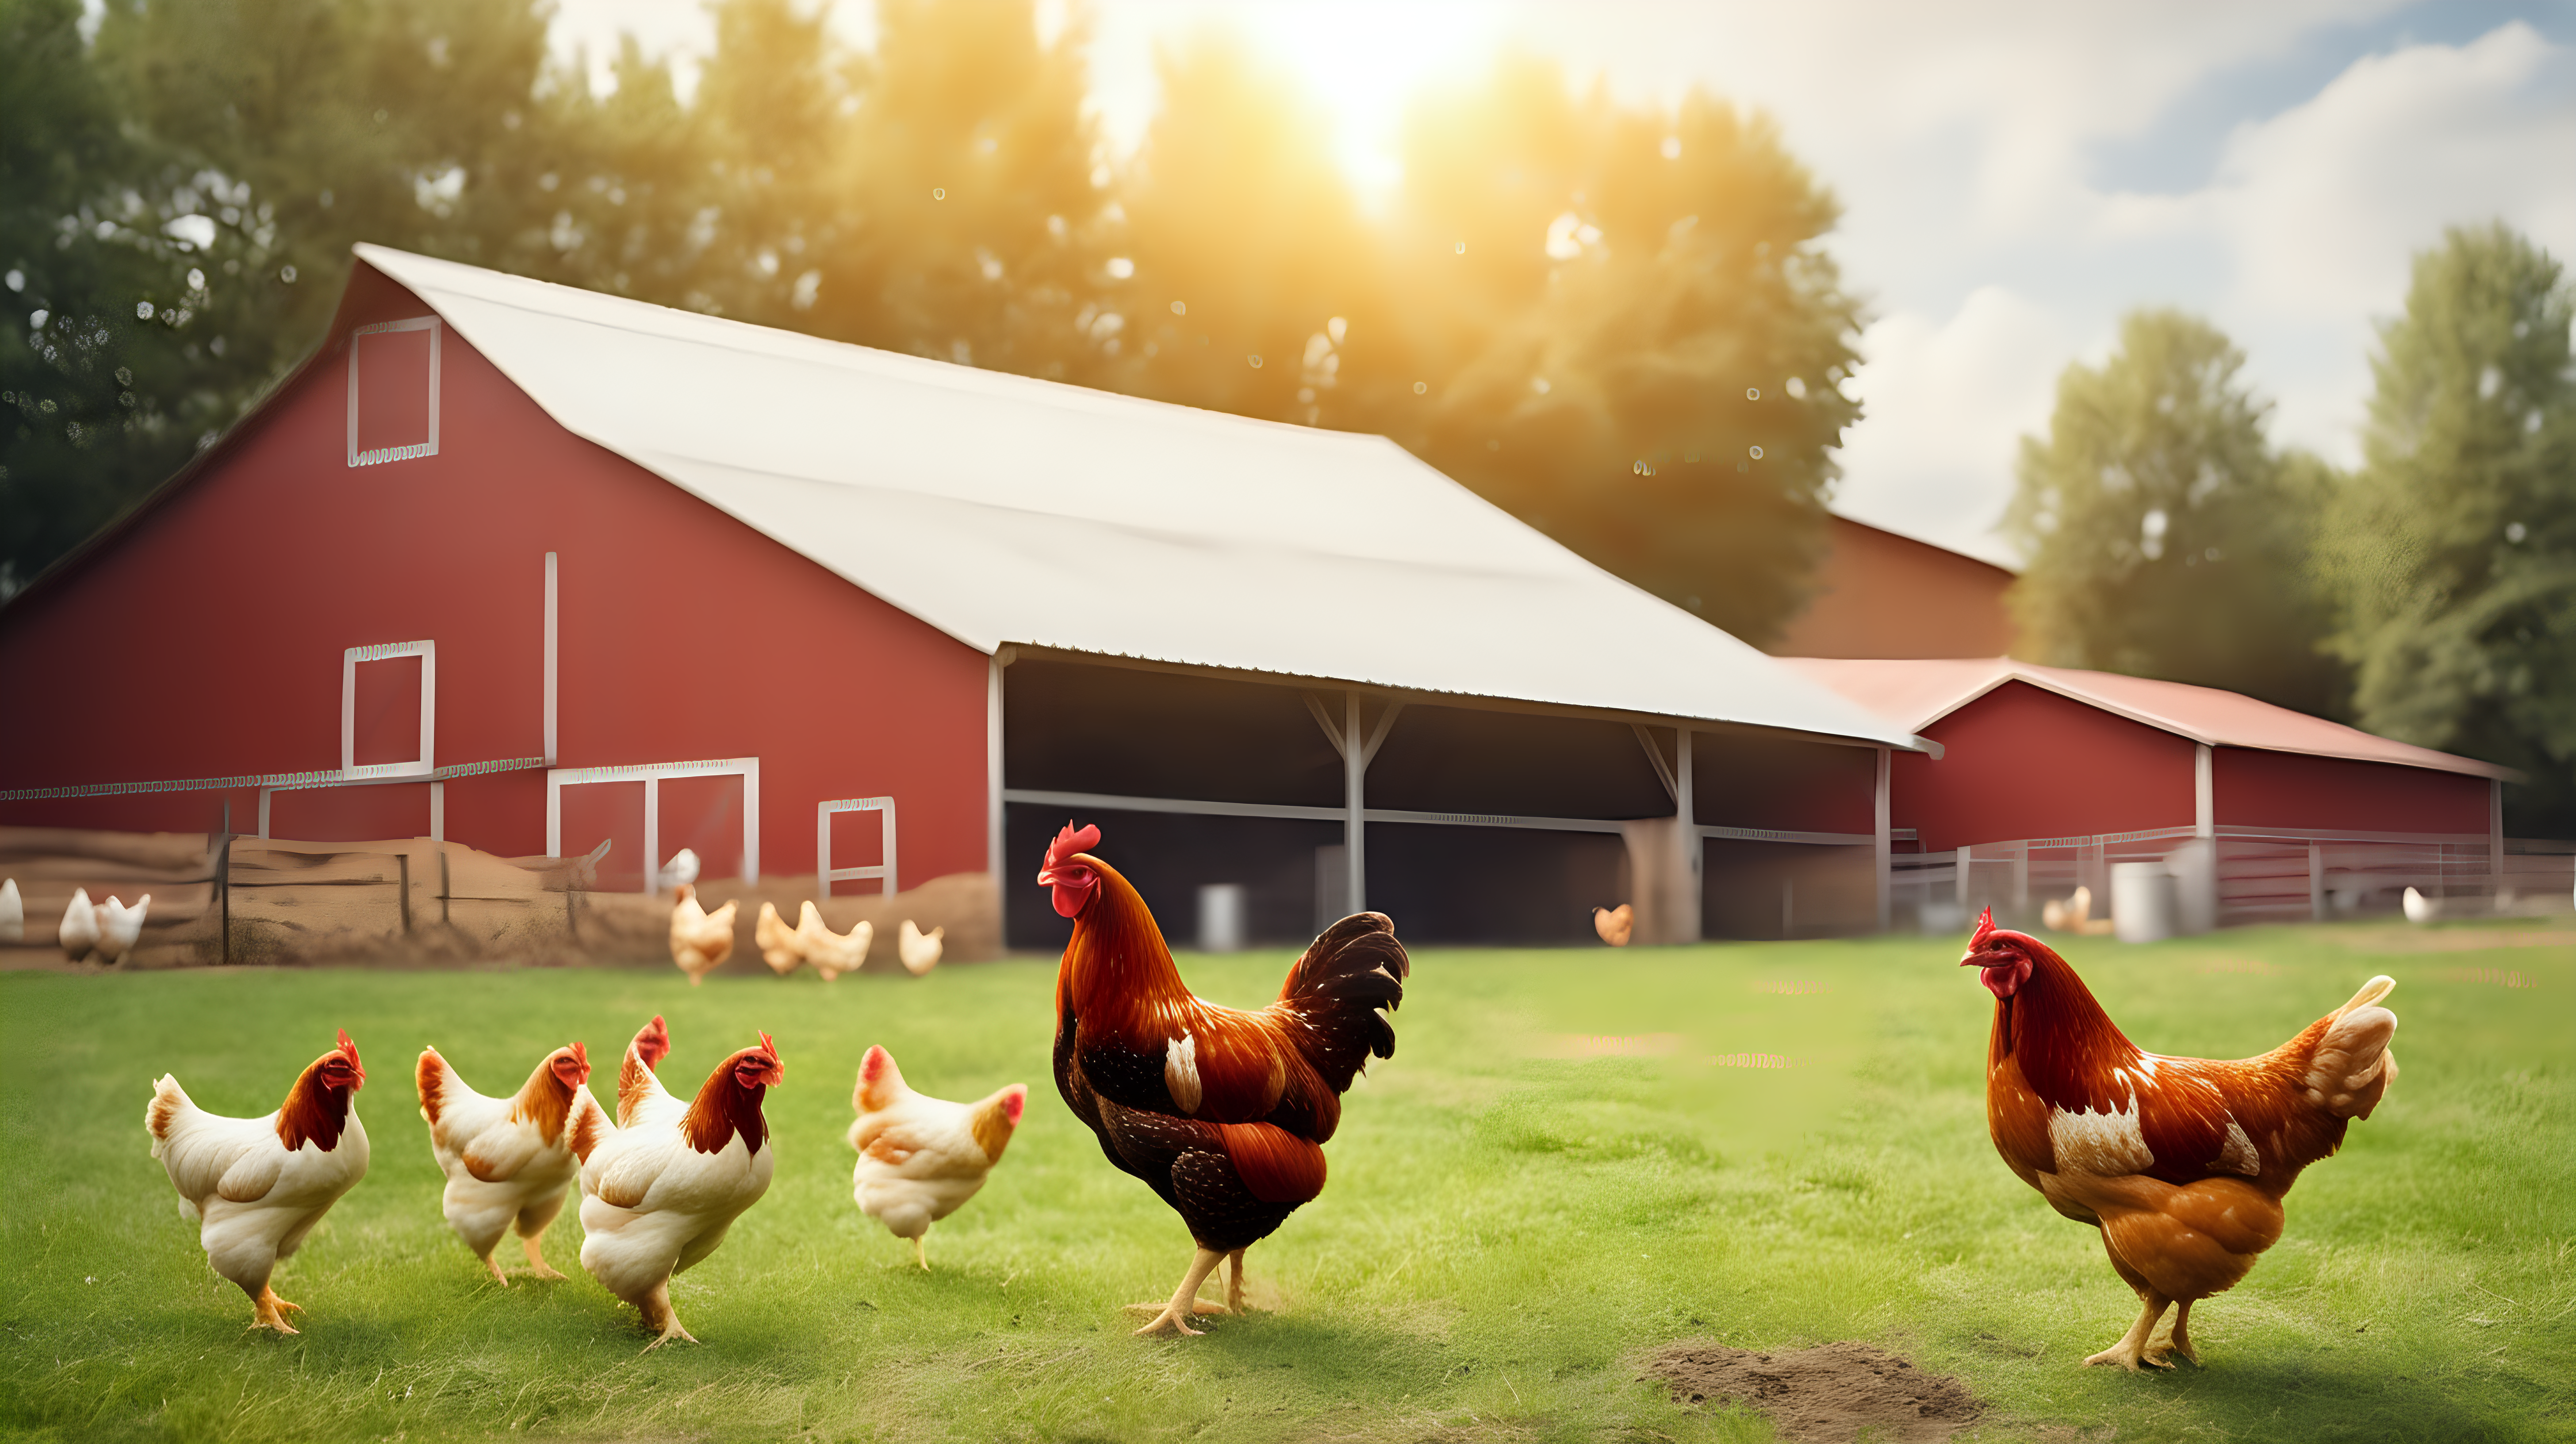 chicken farm barn outside with hen, isolated on background